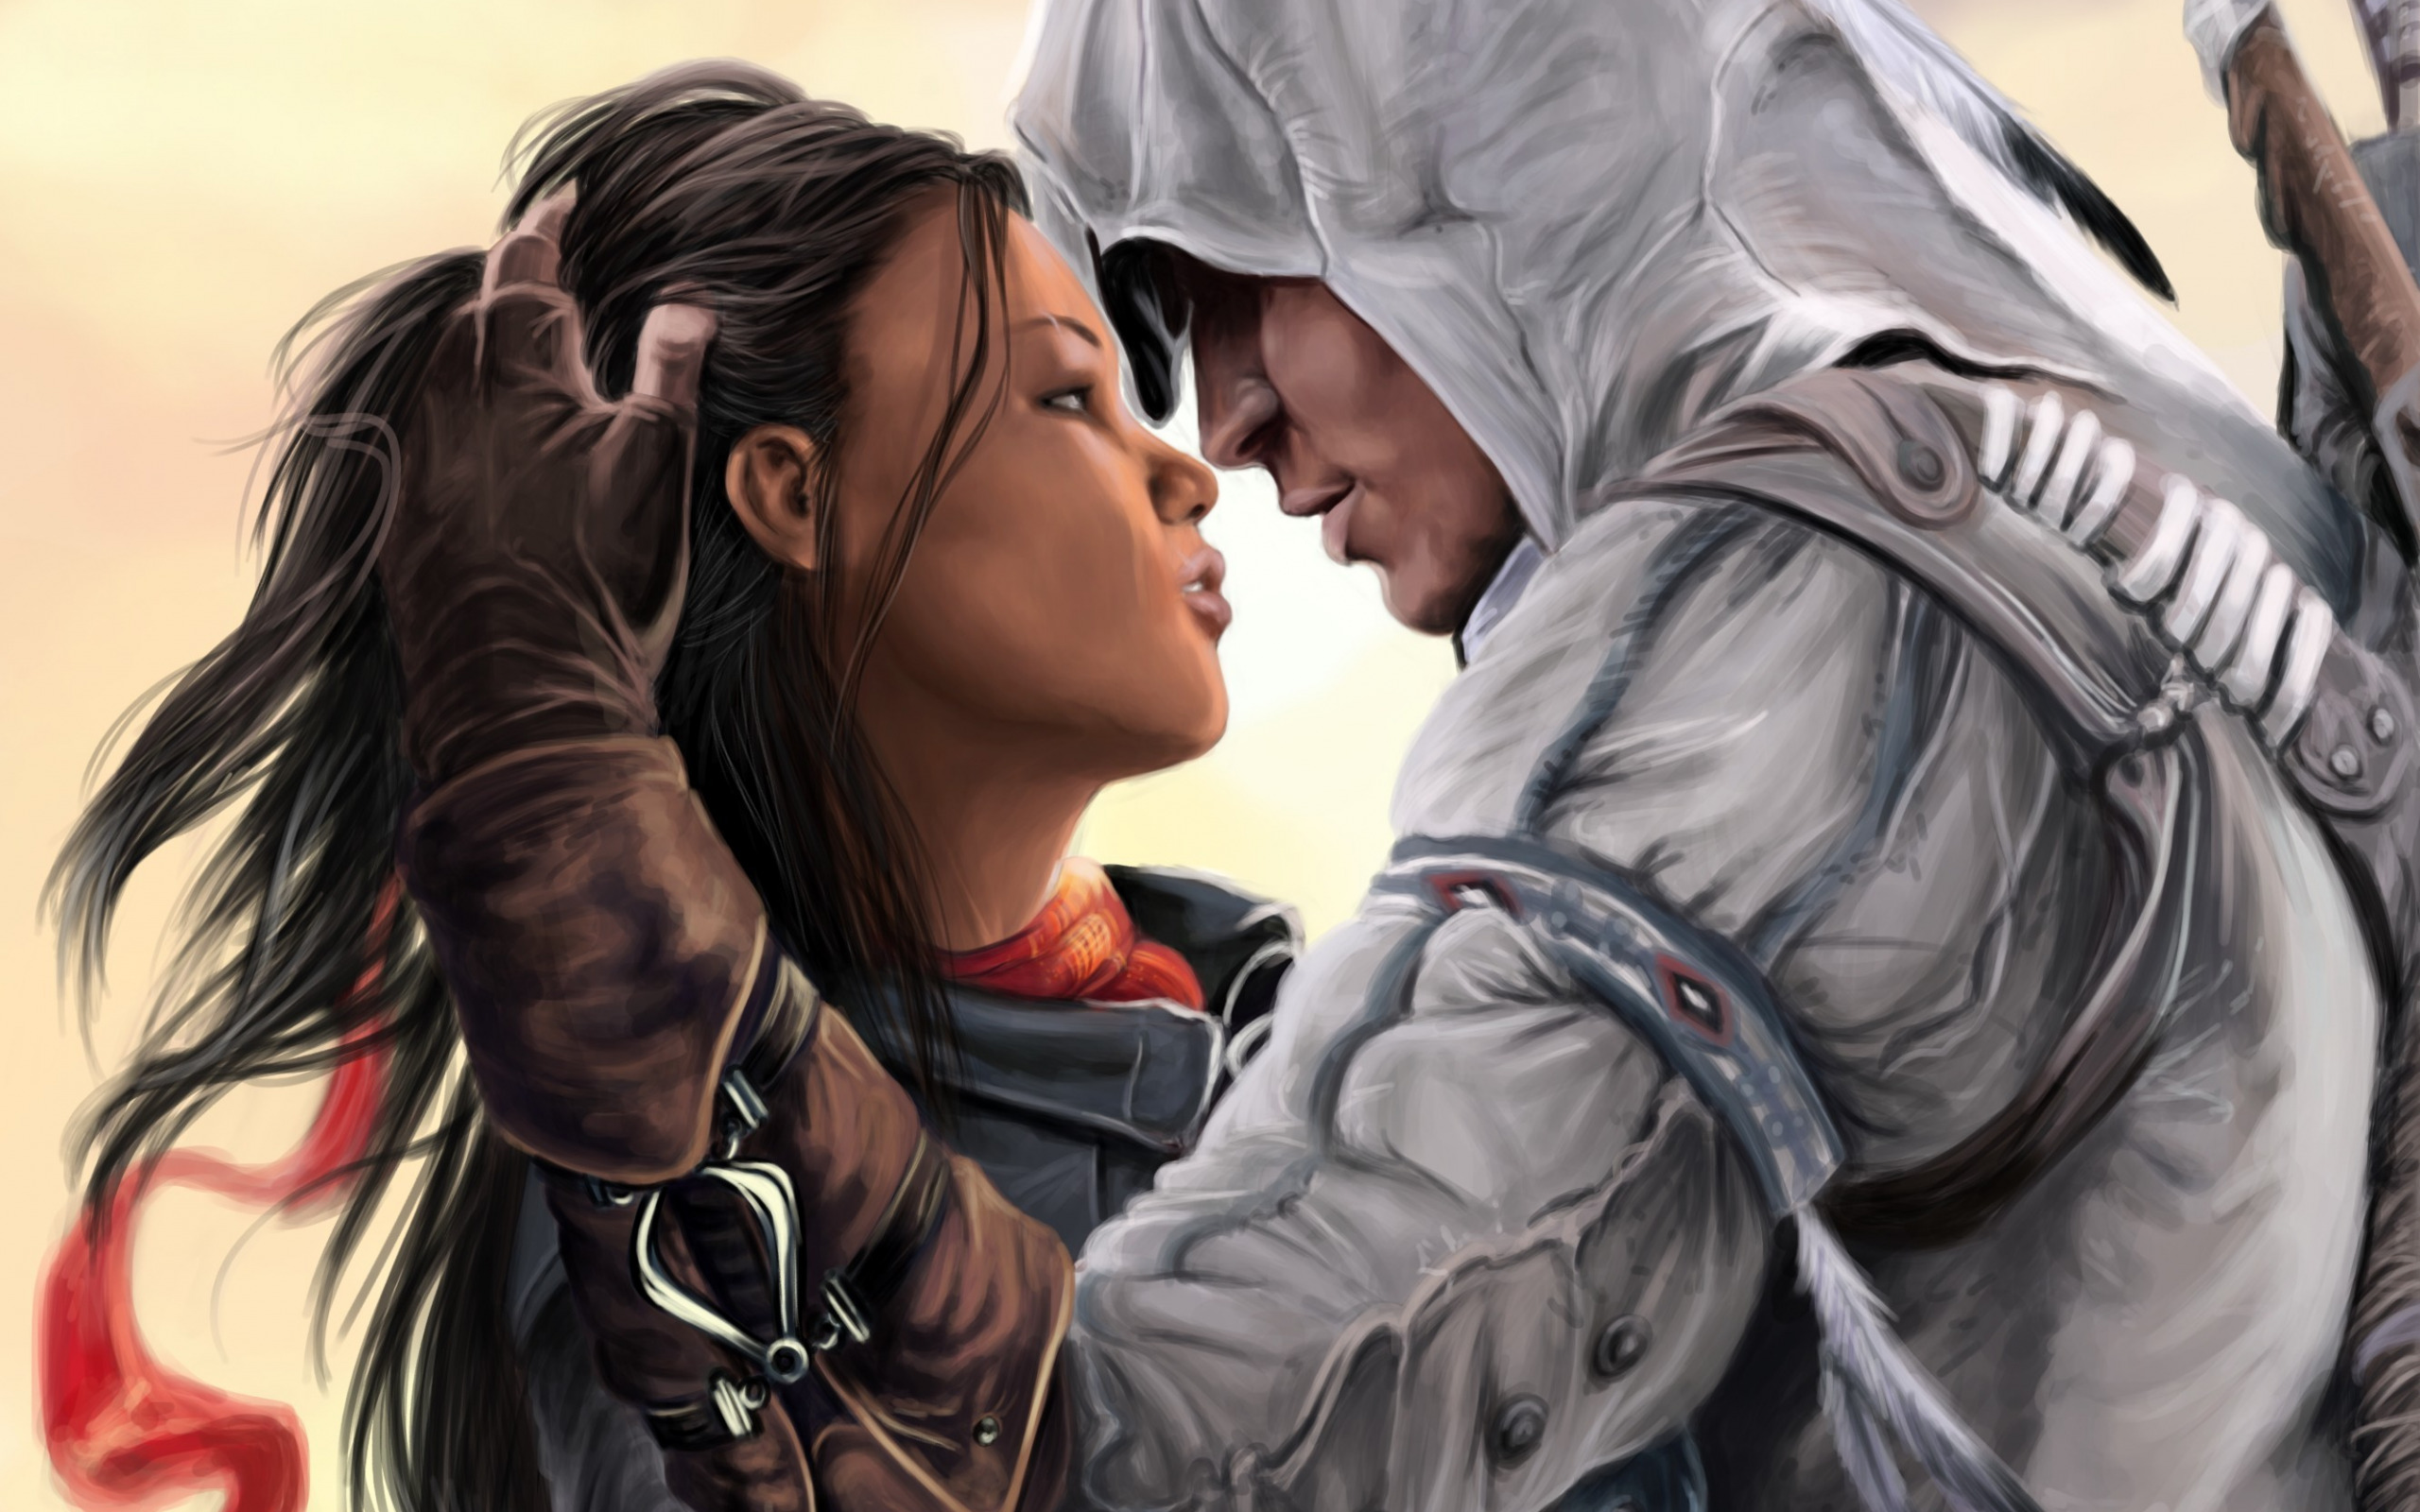 video game, assassin's creed iii, assassin's creed, aveline de grandpré, connor (assassin's creed), couple, love